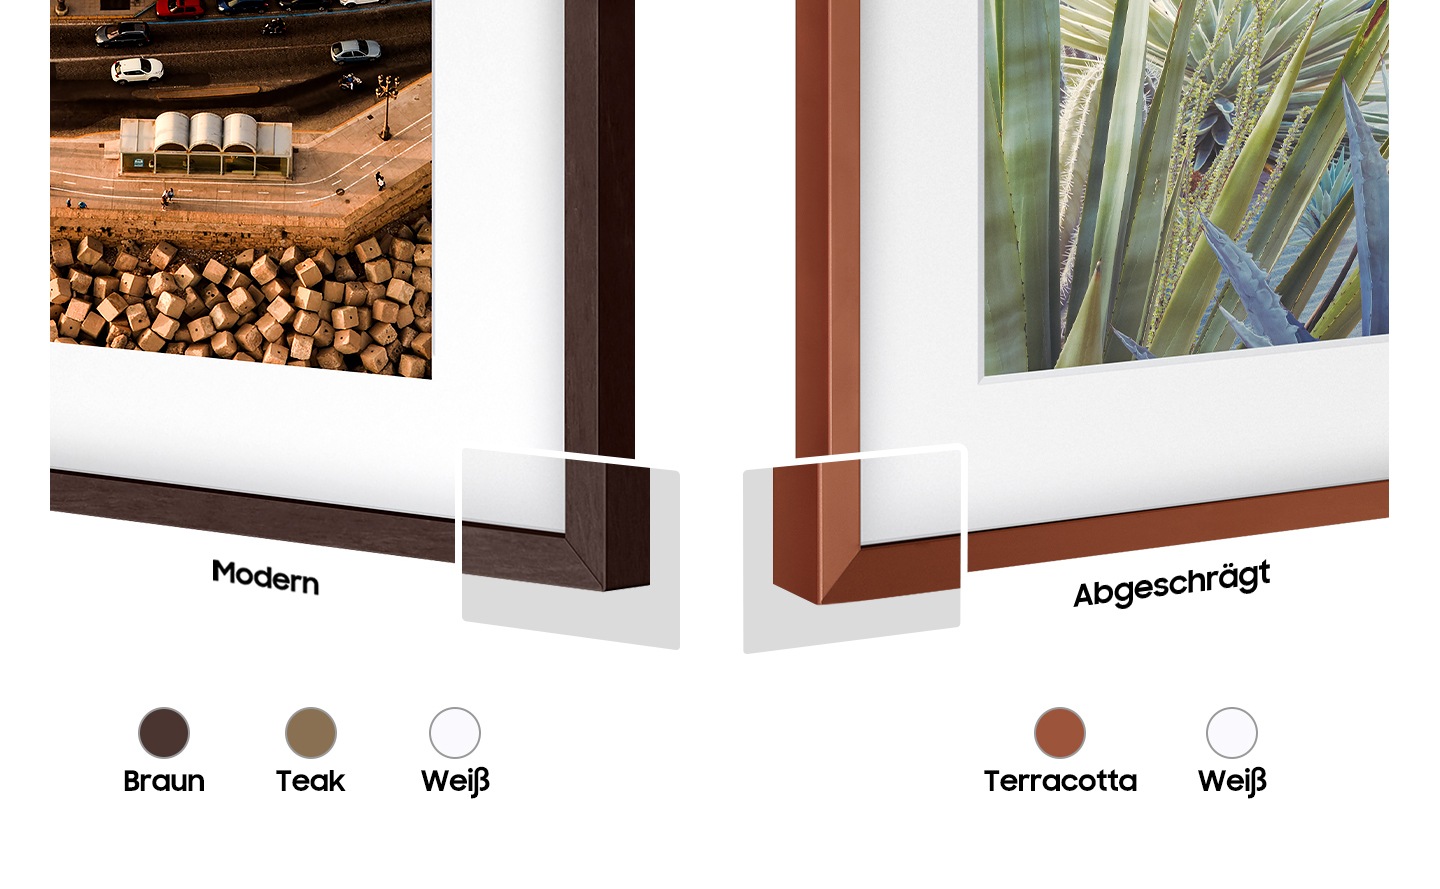 Two bezel types, Modern and Beveled, sit side-by-side to offer users a choice of contemporary or authentic frame style. Color chips for Brown, Teak, White and Brick Red are shown.